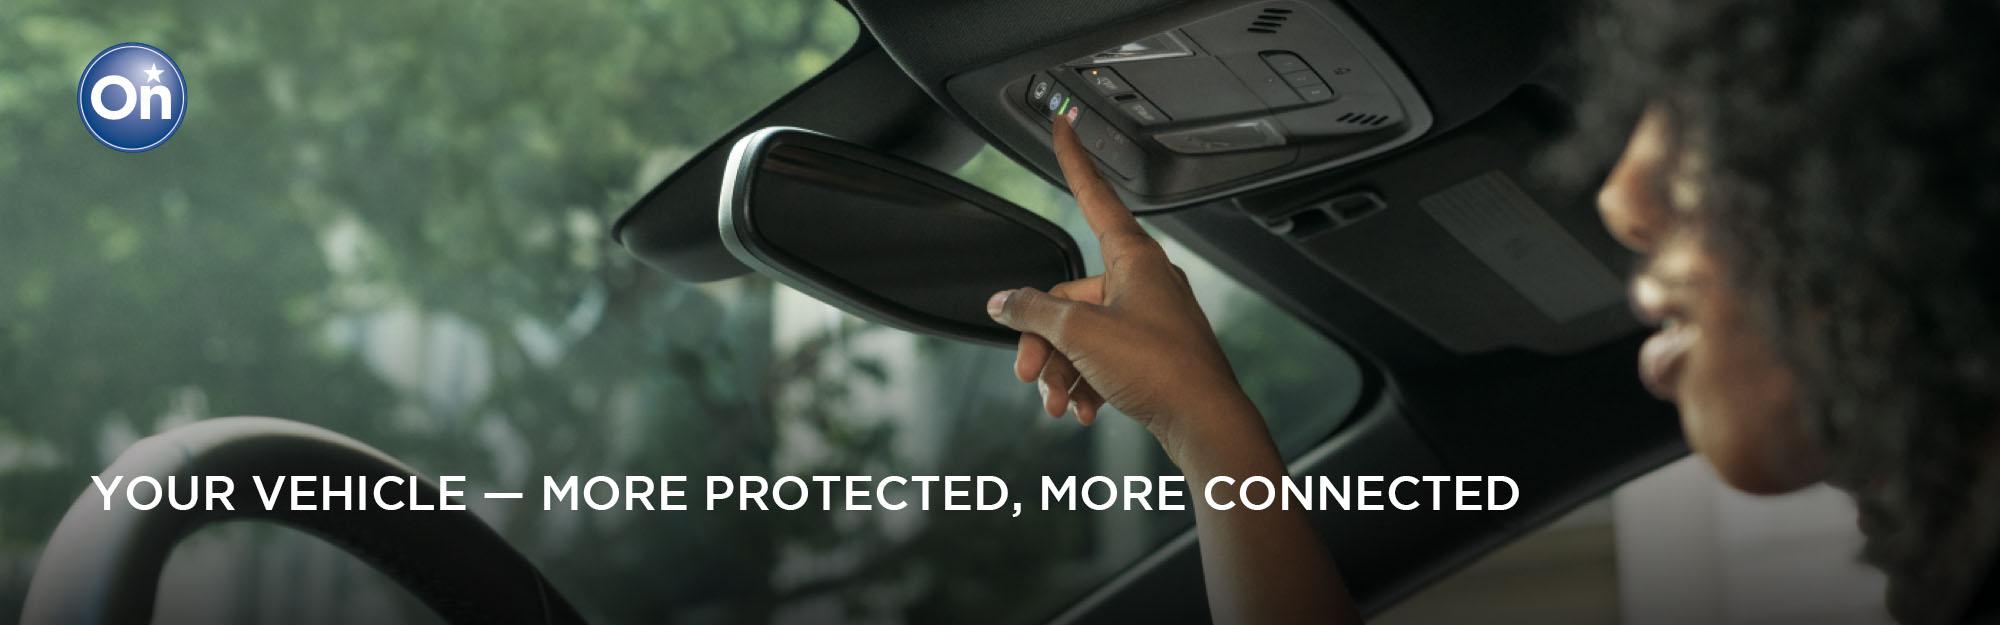 OnStar Safety and Security